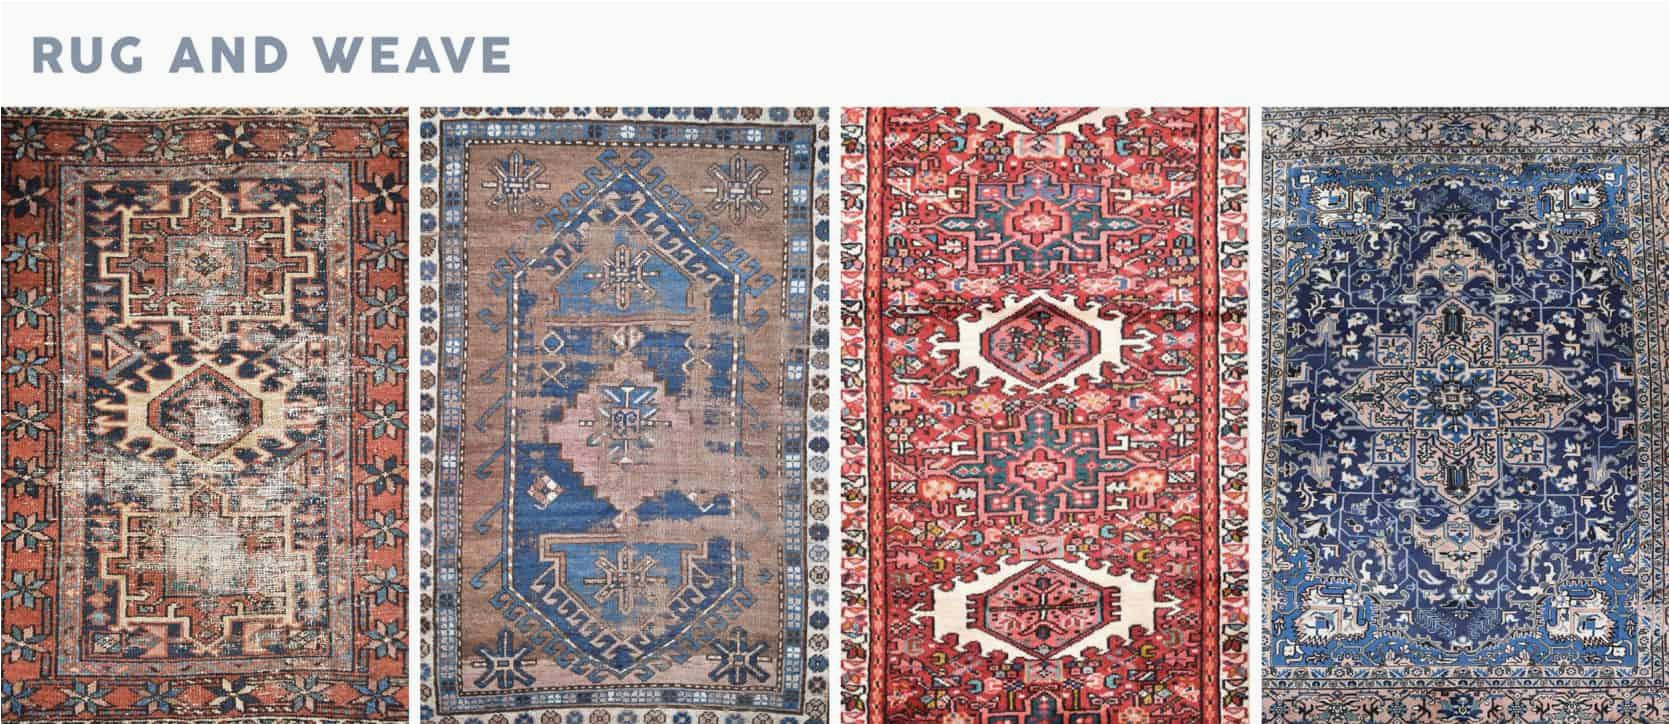 Antique area Rugs for Sale where to Buy Vintage Rugs   Best Shopping Tips